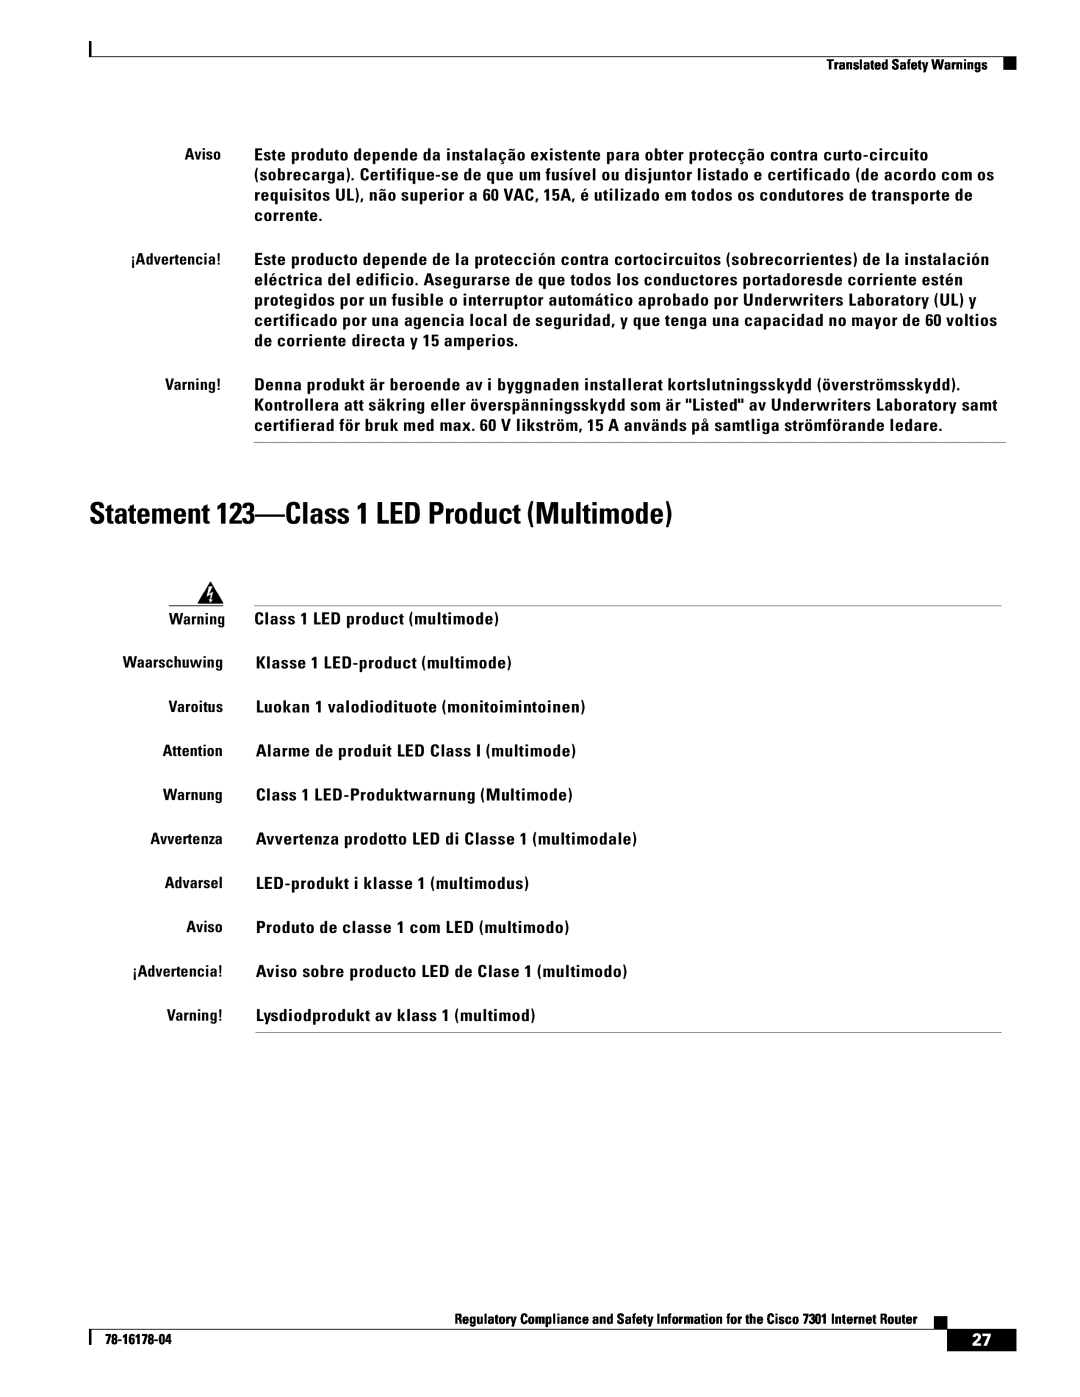 Cisco Systems CISCO7301 manual Statement 123-Class 1 LED Product Multimode 